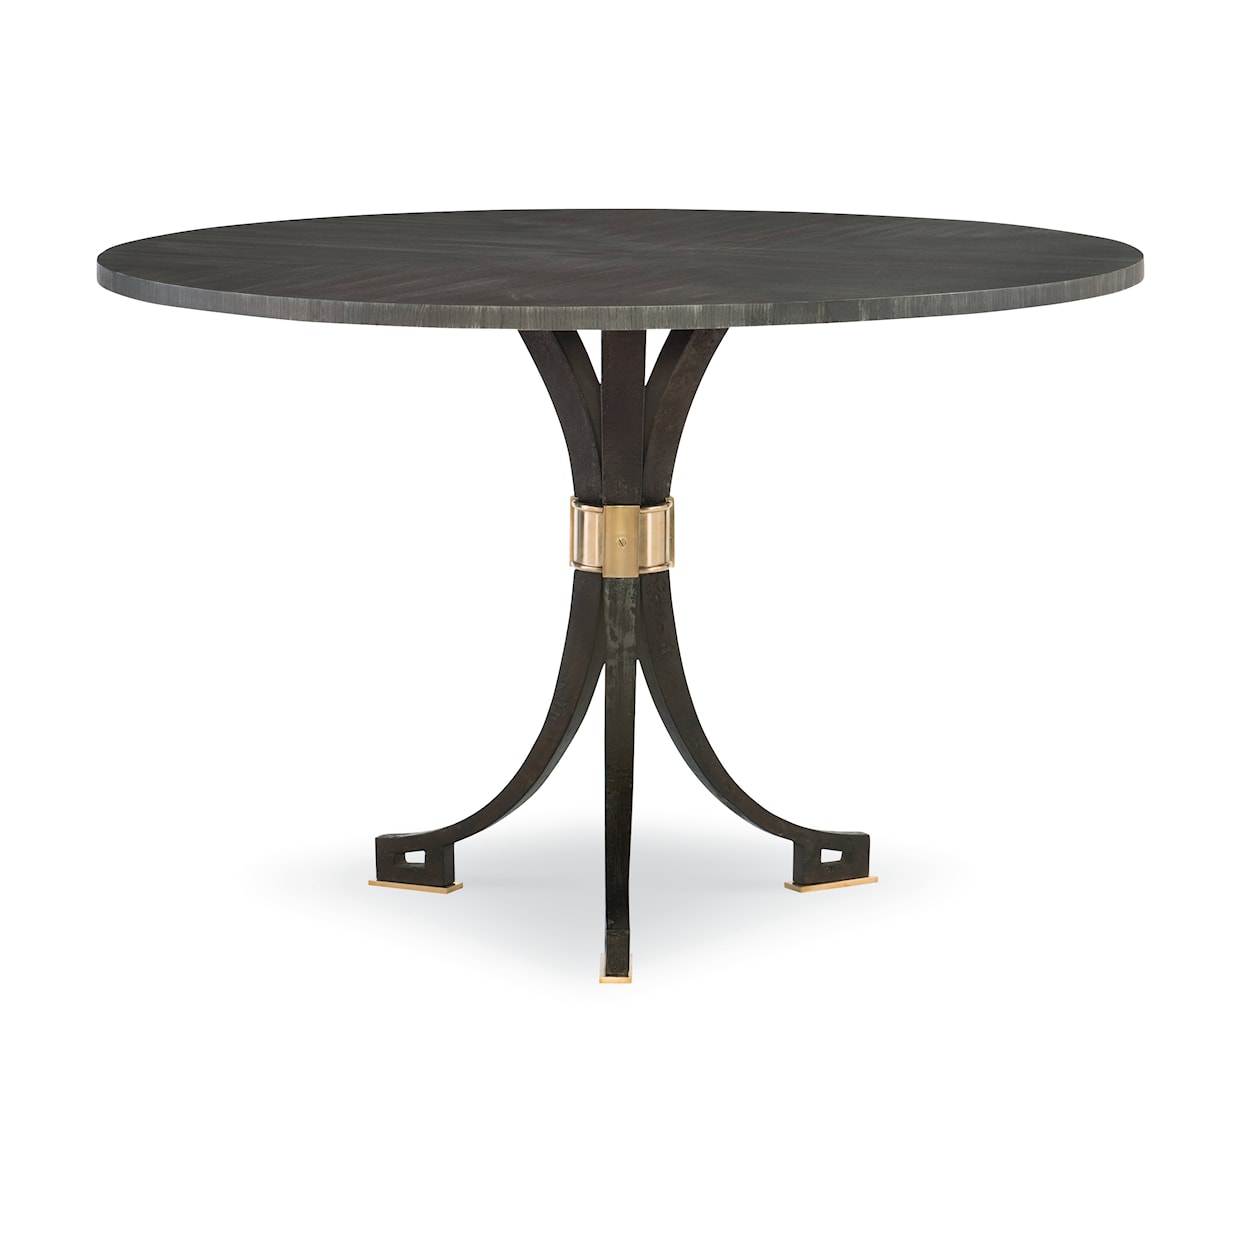 Century Windsor Smith Phase 1 Dining Table